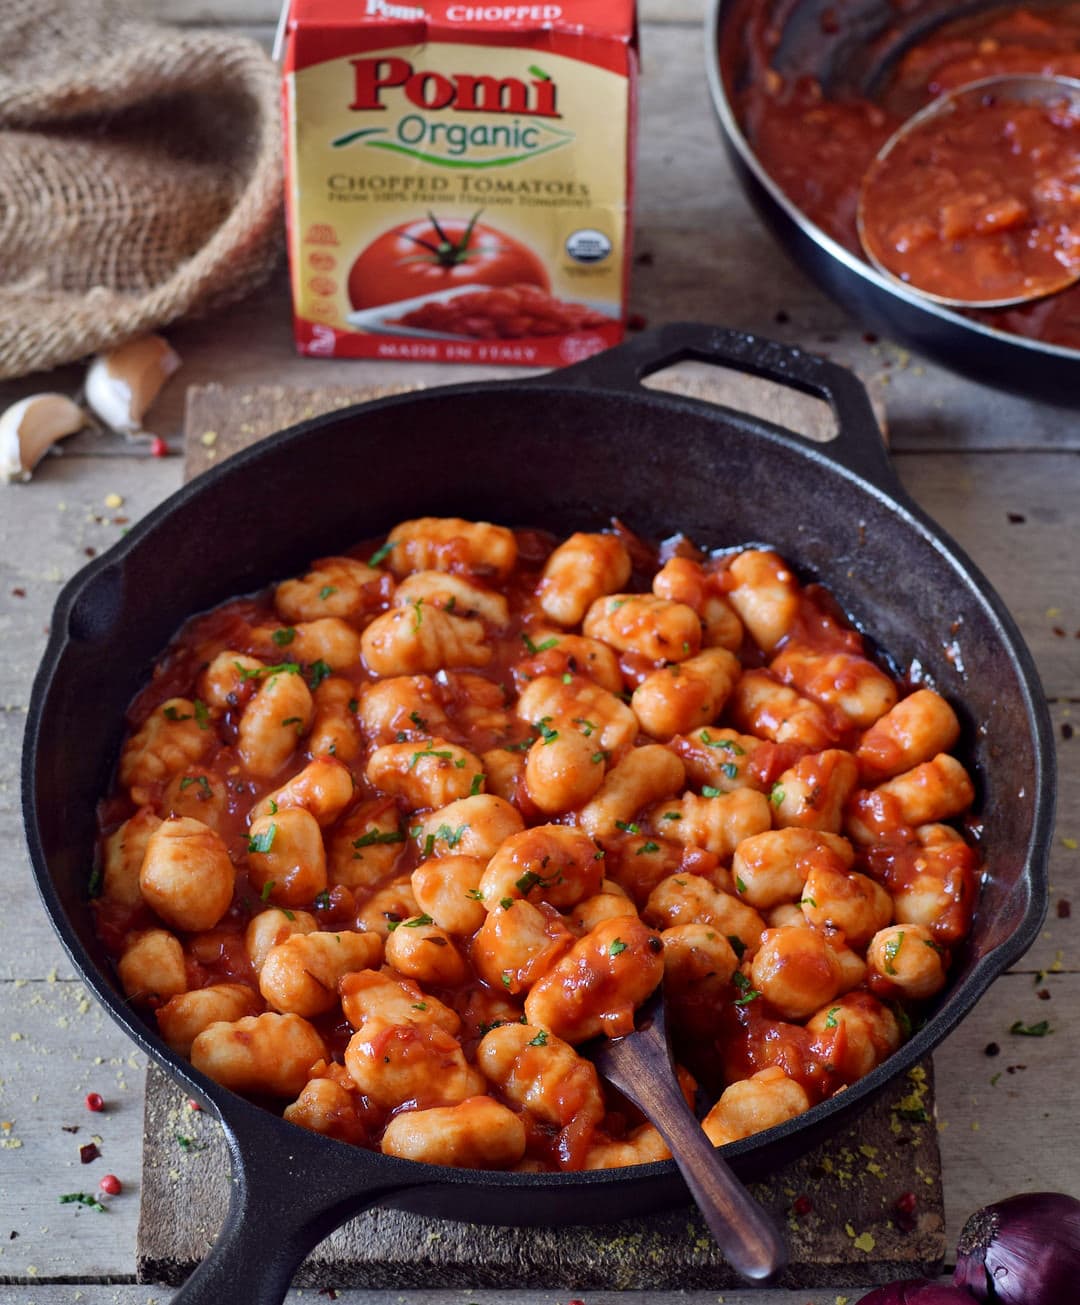 gnocchi all'arrabbiata in a skillet made with pomi tomatoes